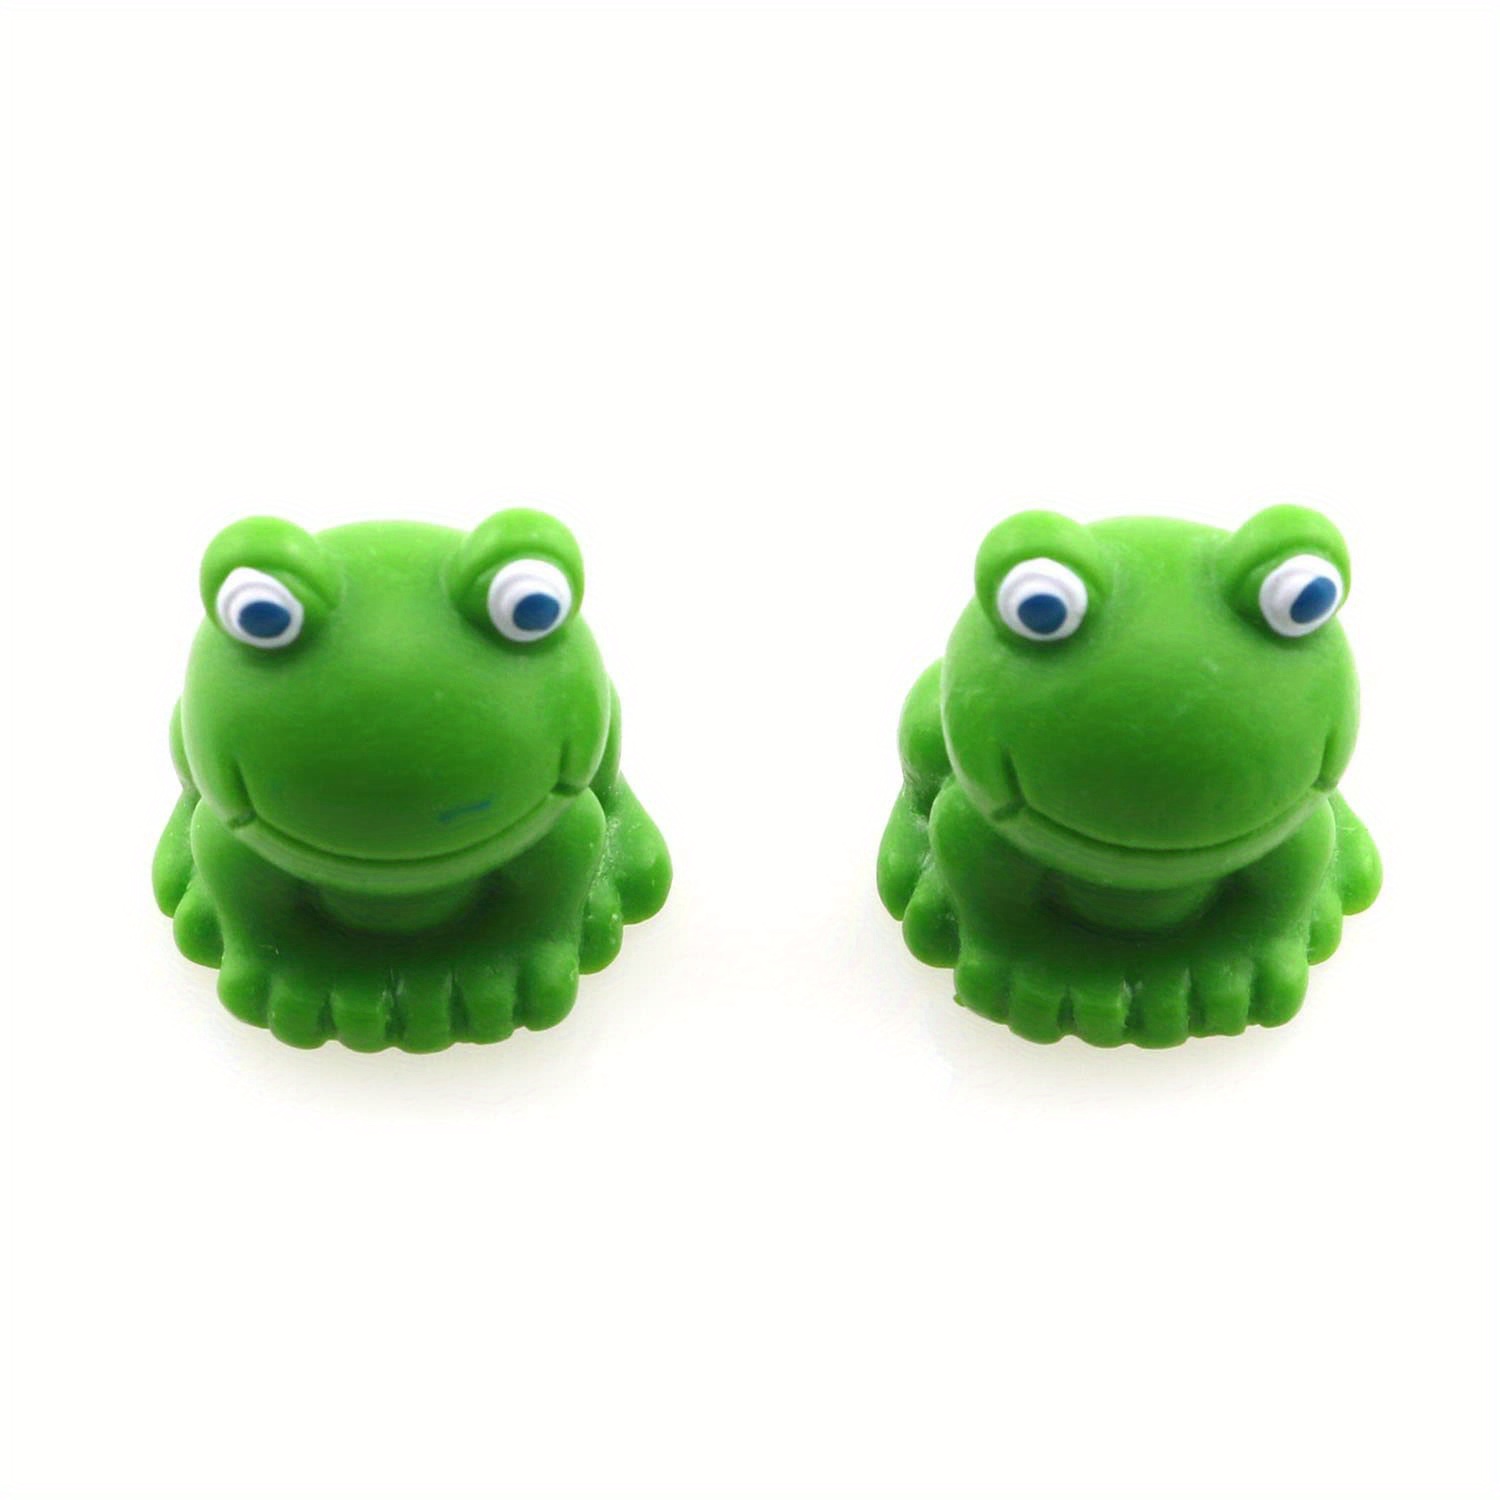  Mini Frogs 200 Pack, Tiny Cute Frog Figurines, Green Frog Resin  Miniature Figurines for DIY Terrarium Crafts Miniature Moss Landscape Fairy  Garden Home Decoration (100Pcs, White) : Patio, Lawn & Garden